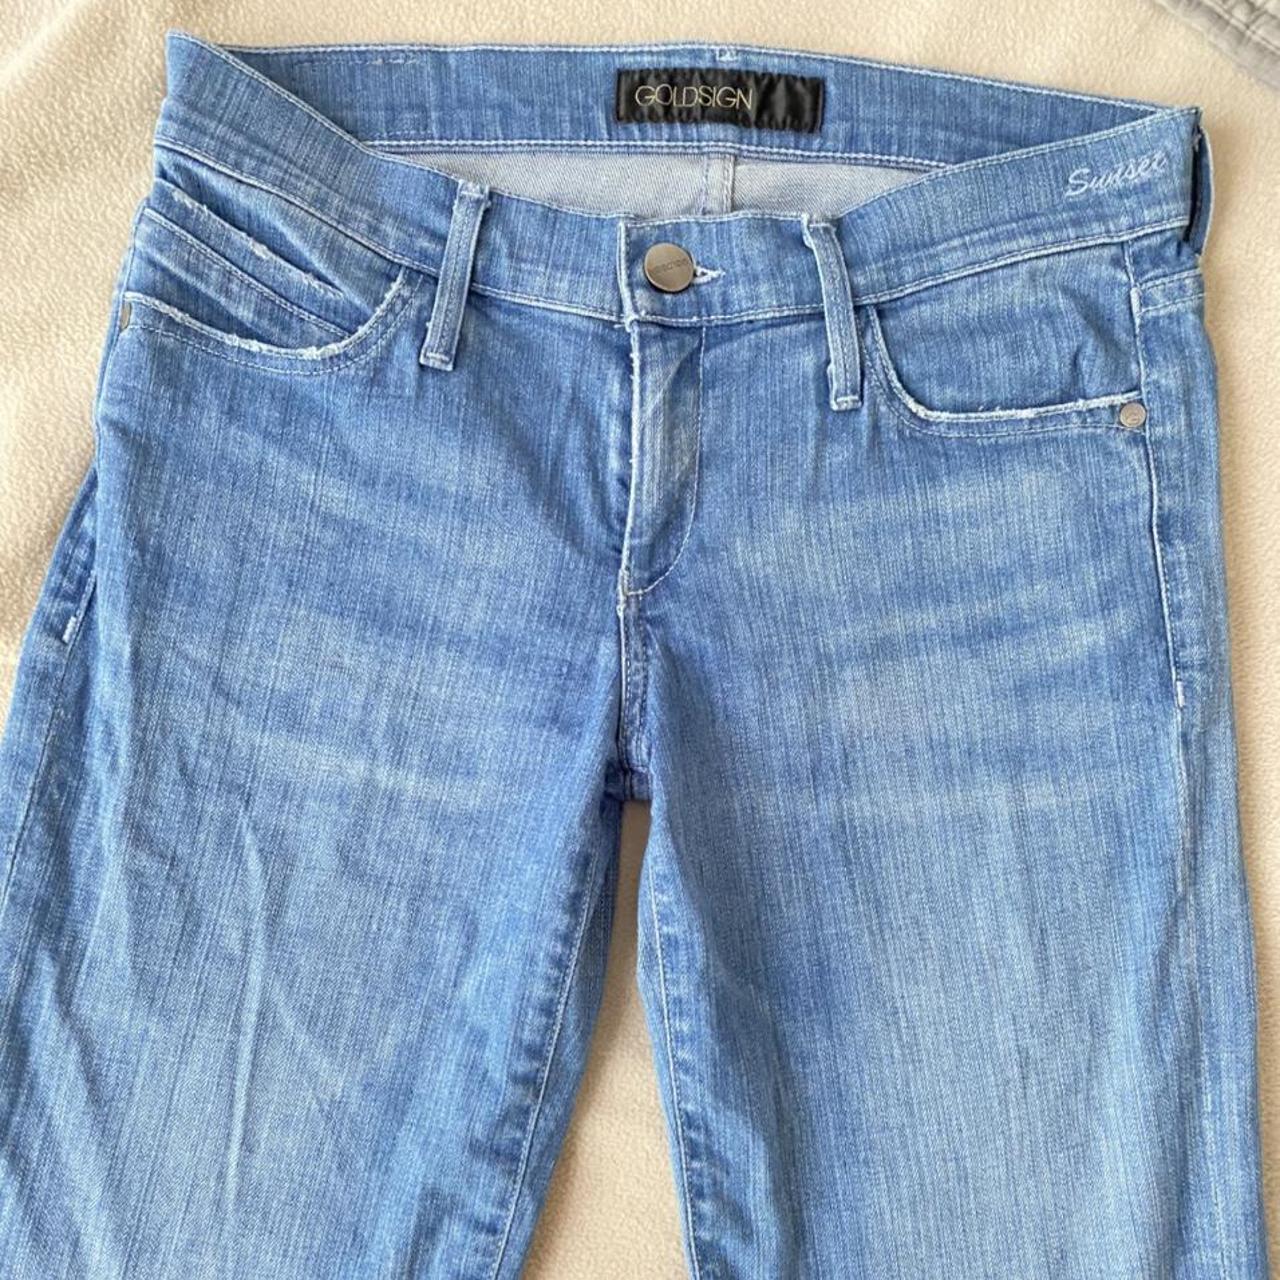 Product Image 1 - Jeans size 27 but could